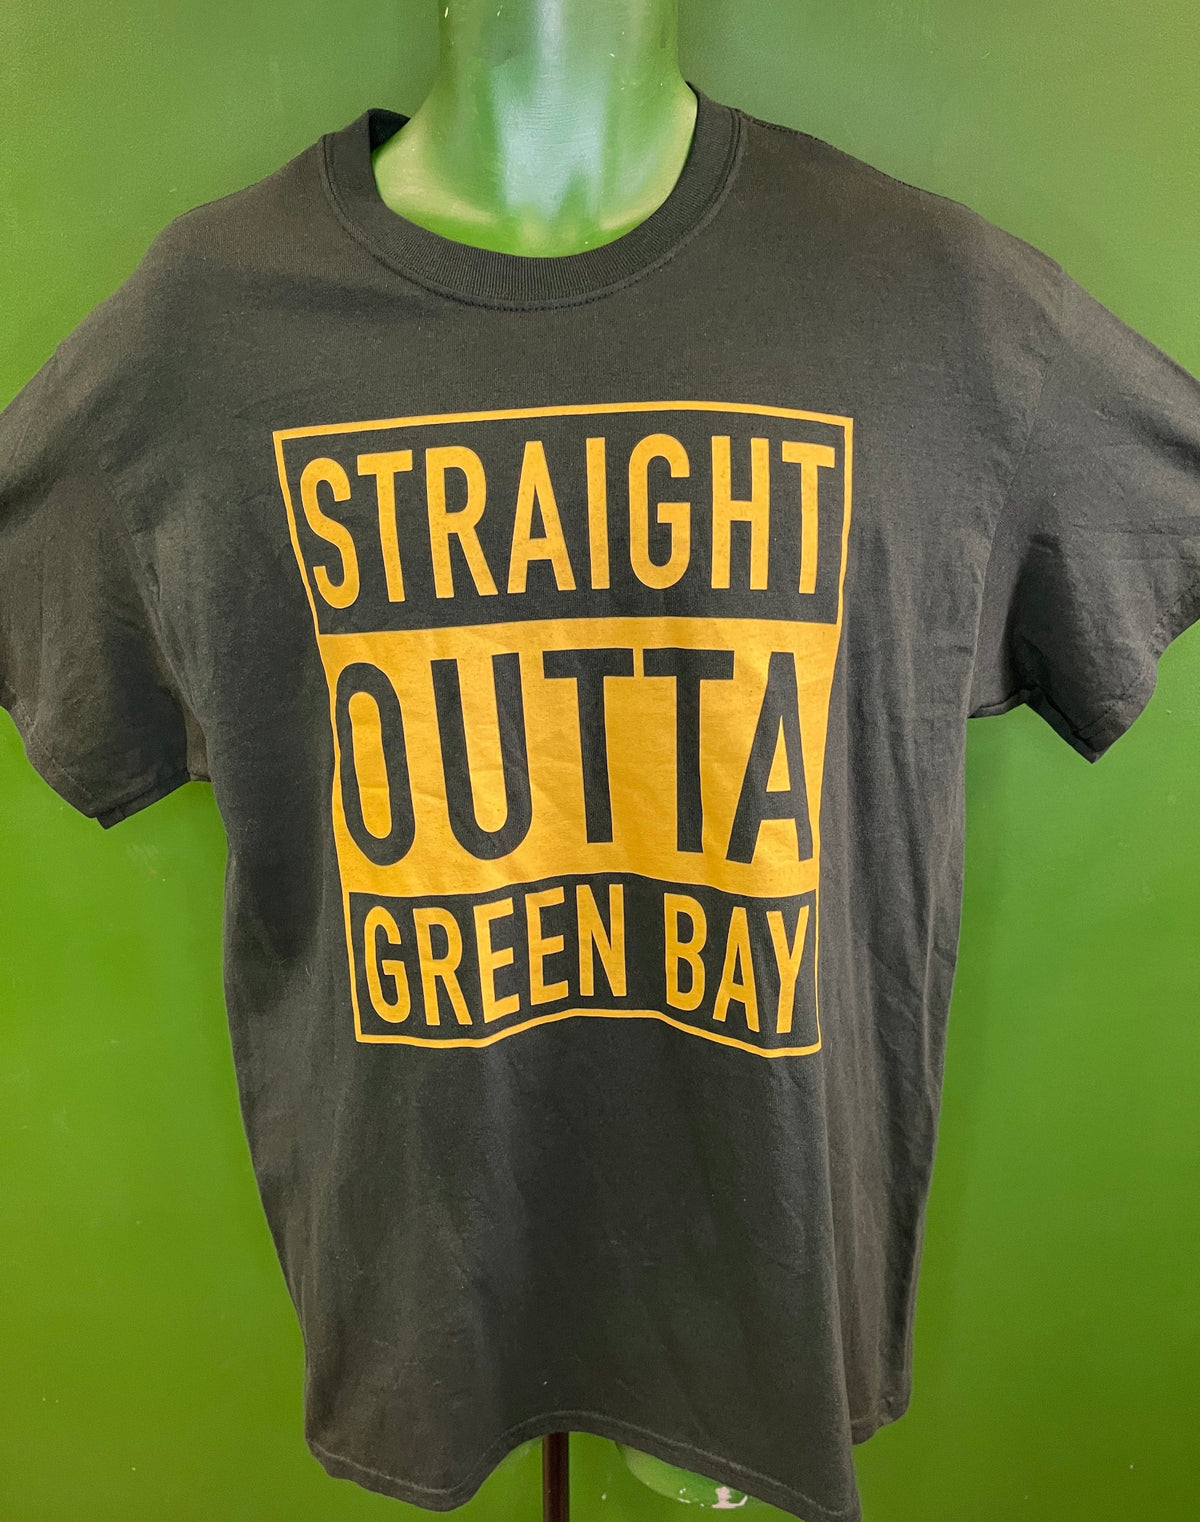 NFL Green Bay Packers "Straight Outta Green Bay" T-Shirt Men's Large